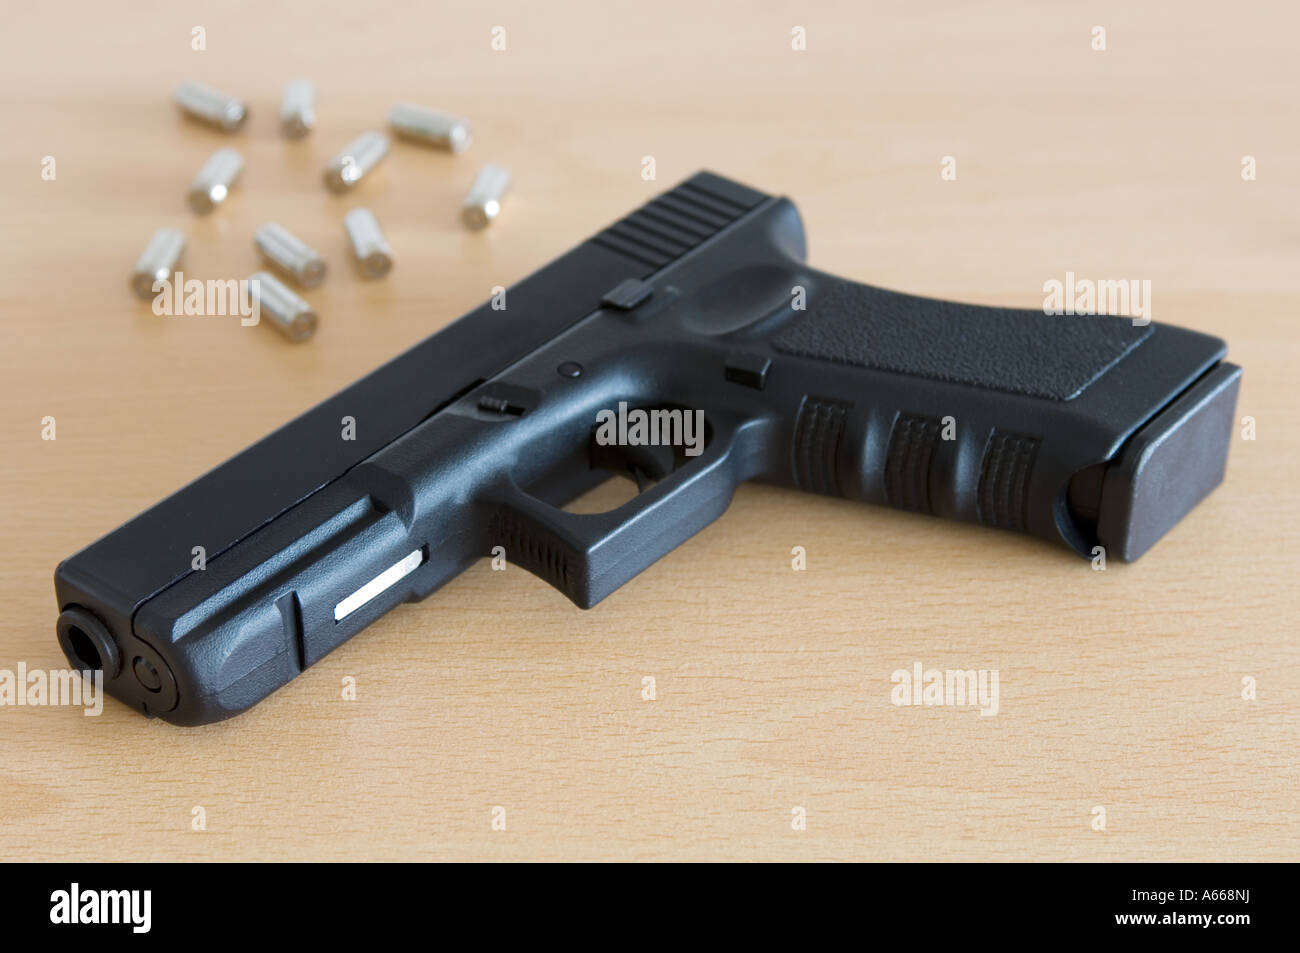 a glock automatic pistol with bullet casings (replica gun) Stock Photo